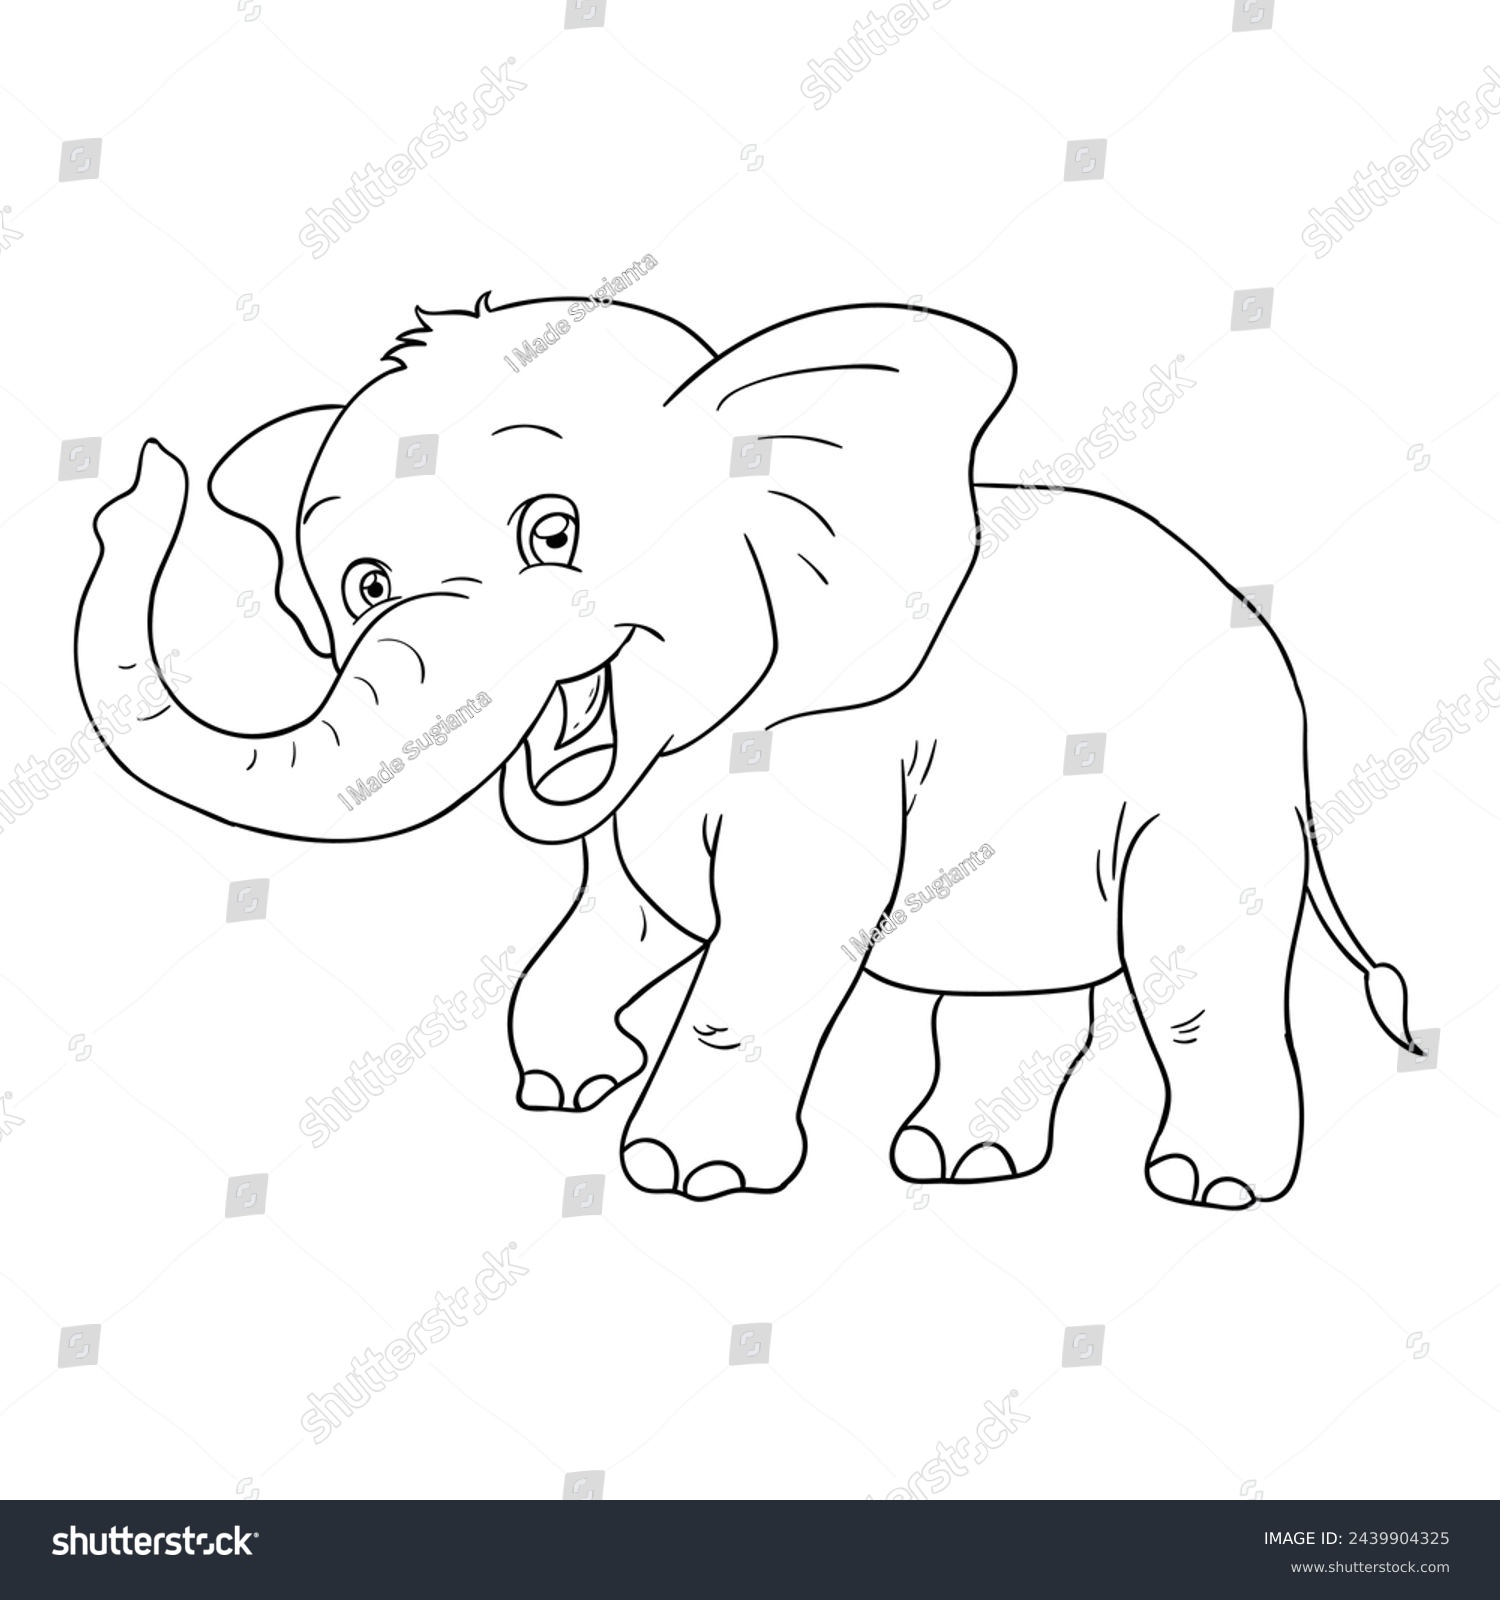 SVG of Hand drawing style of elephant vector. It is suitable animal icon, sig or symbol. svg